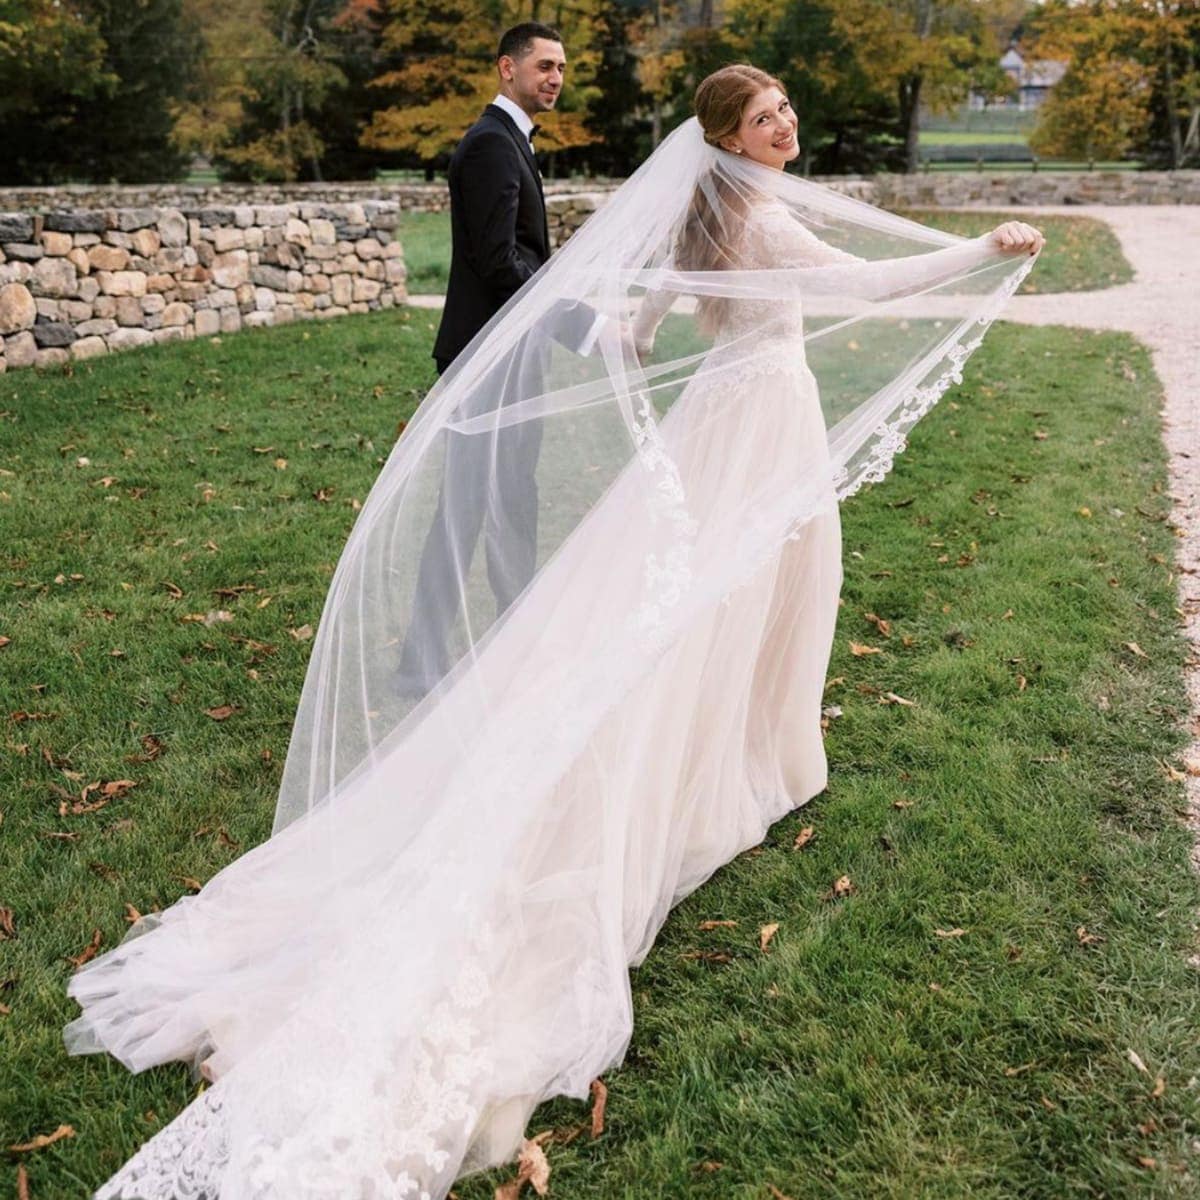 Jennifer Gates married equestrian Nayel Nassar at their Westchester County farm on October 16